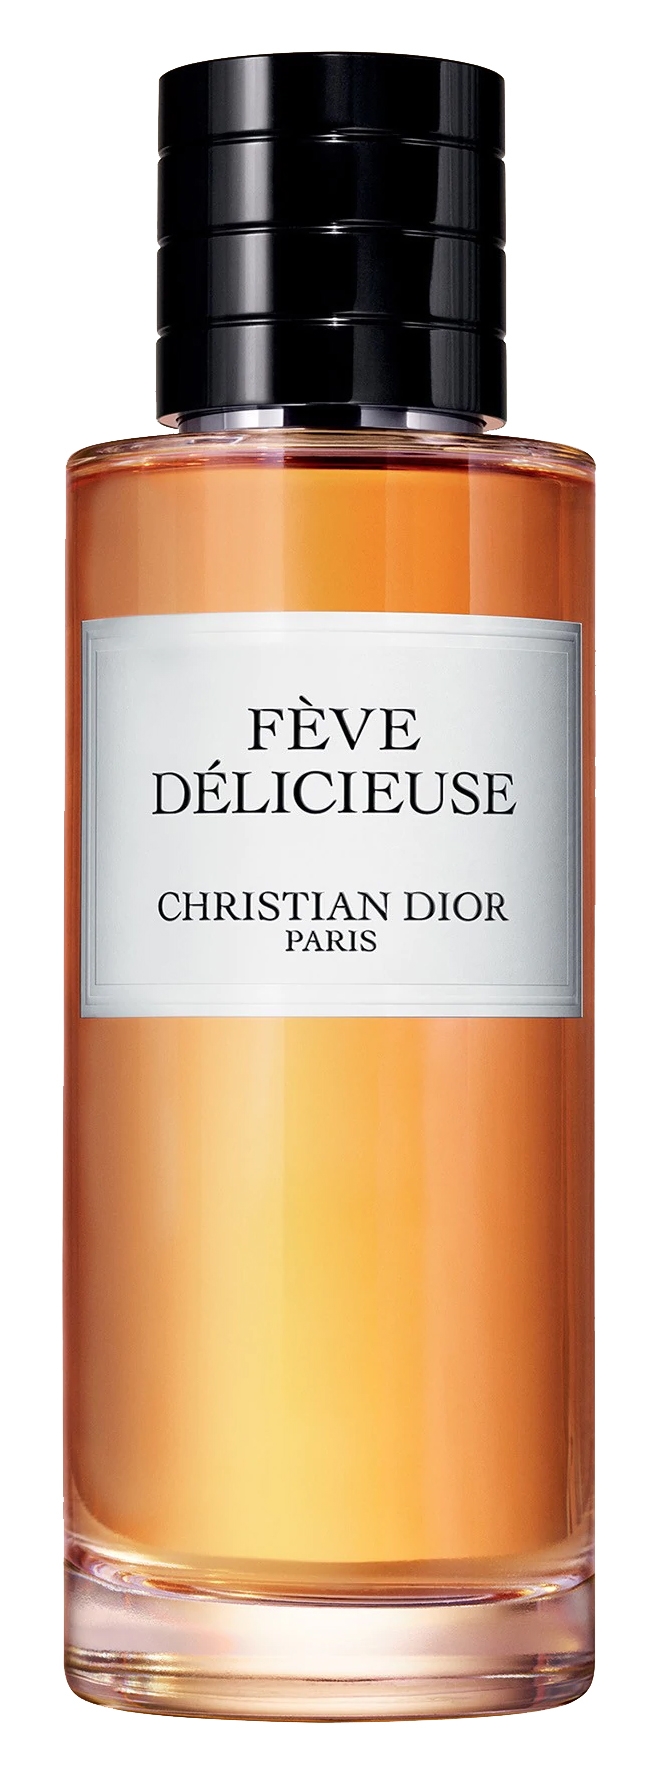 dior perfume feve delicieuse